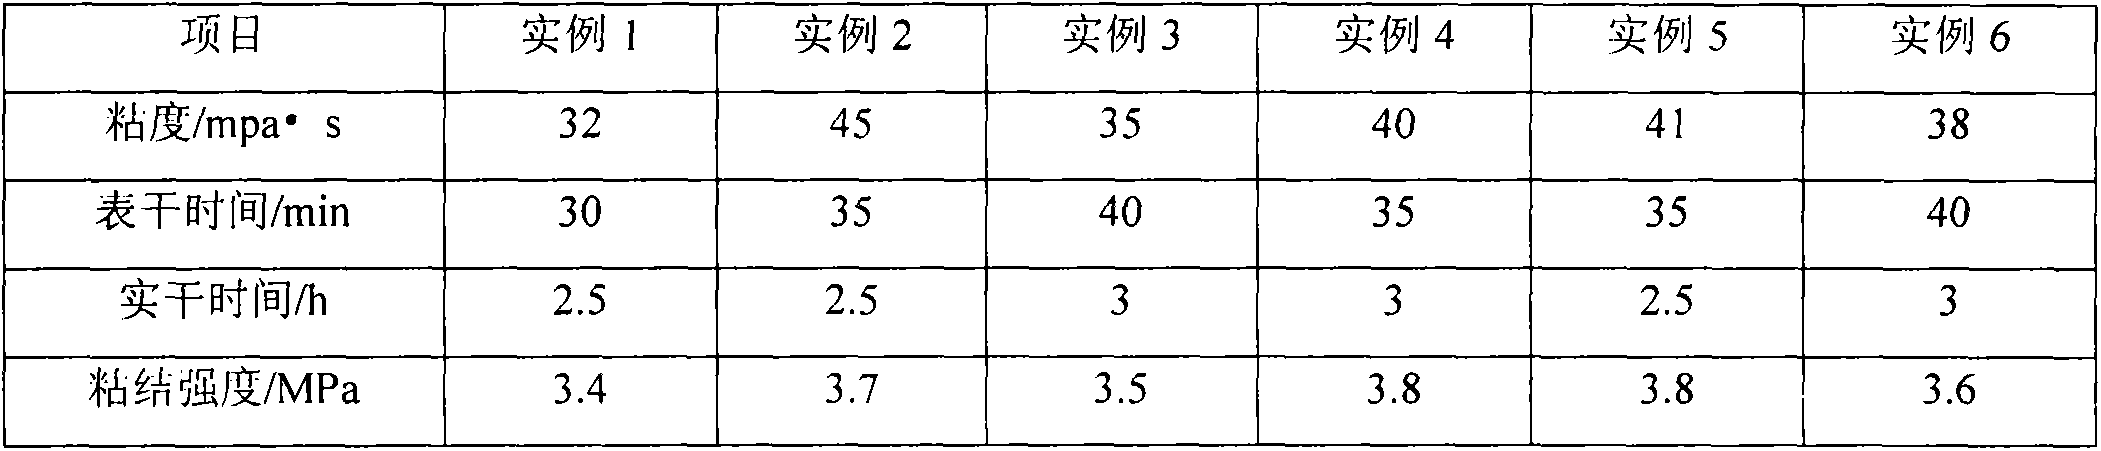 Interface agent for high-speed railway ballastless track polyurethane caulking material and preparation method thereof